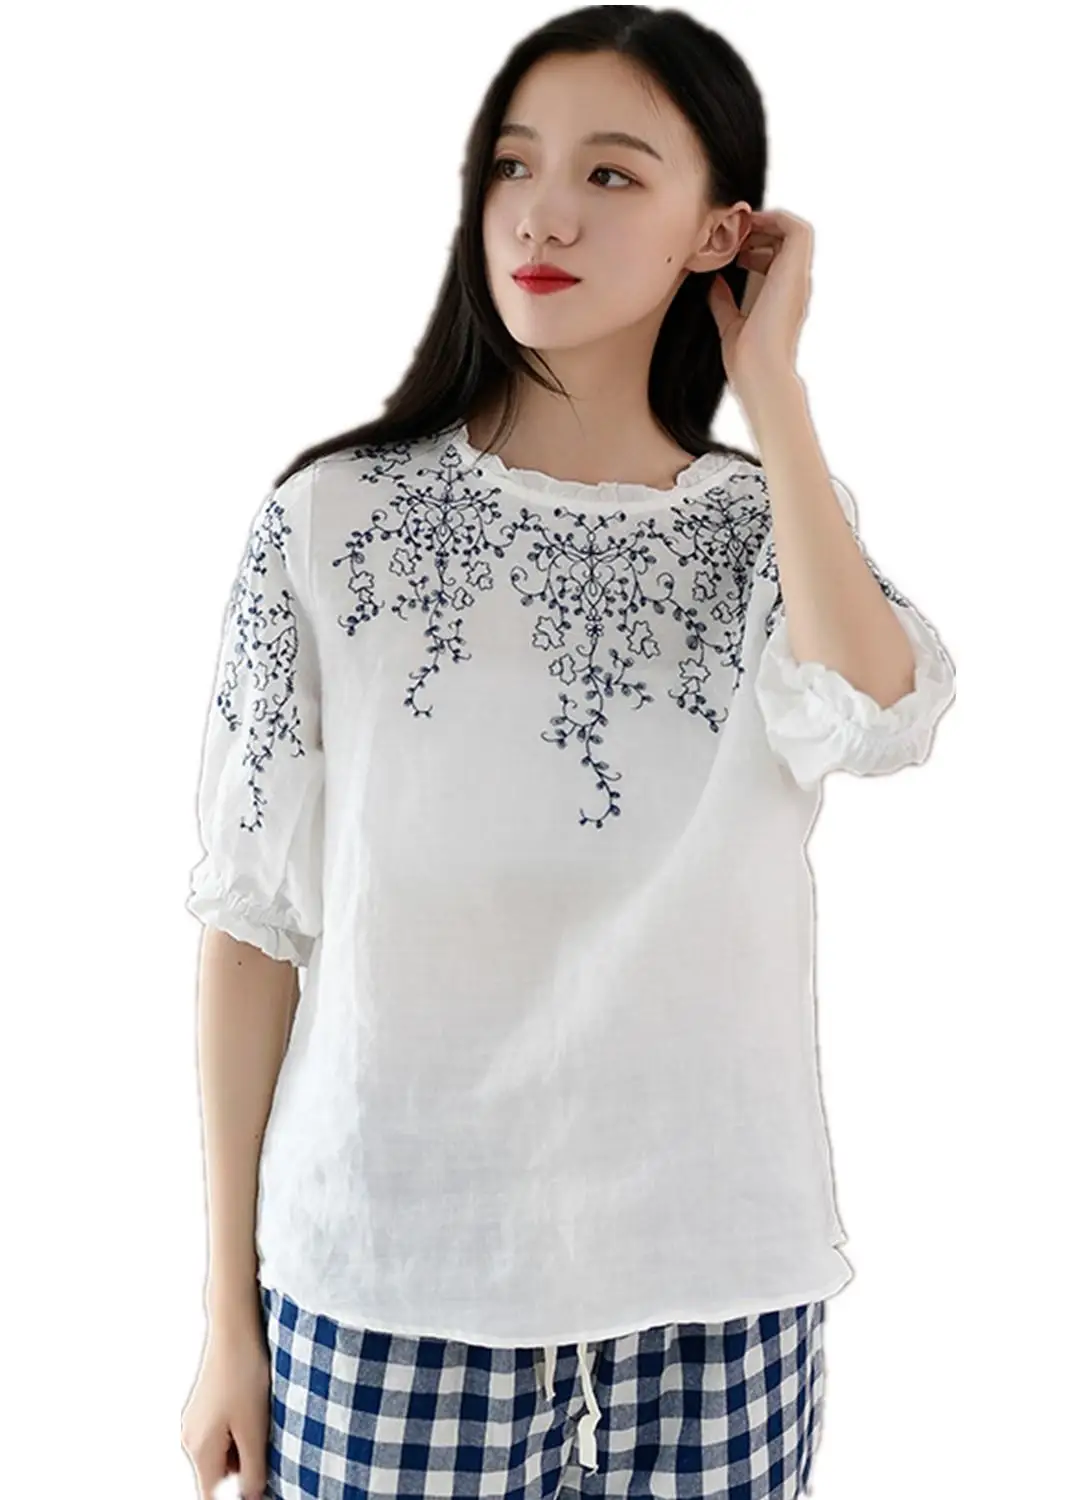 Shanghai Story Linen Cotton Summer Boho Embroidery Chinese Style Tops Shirt Tunic Blouses